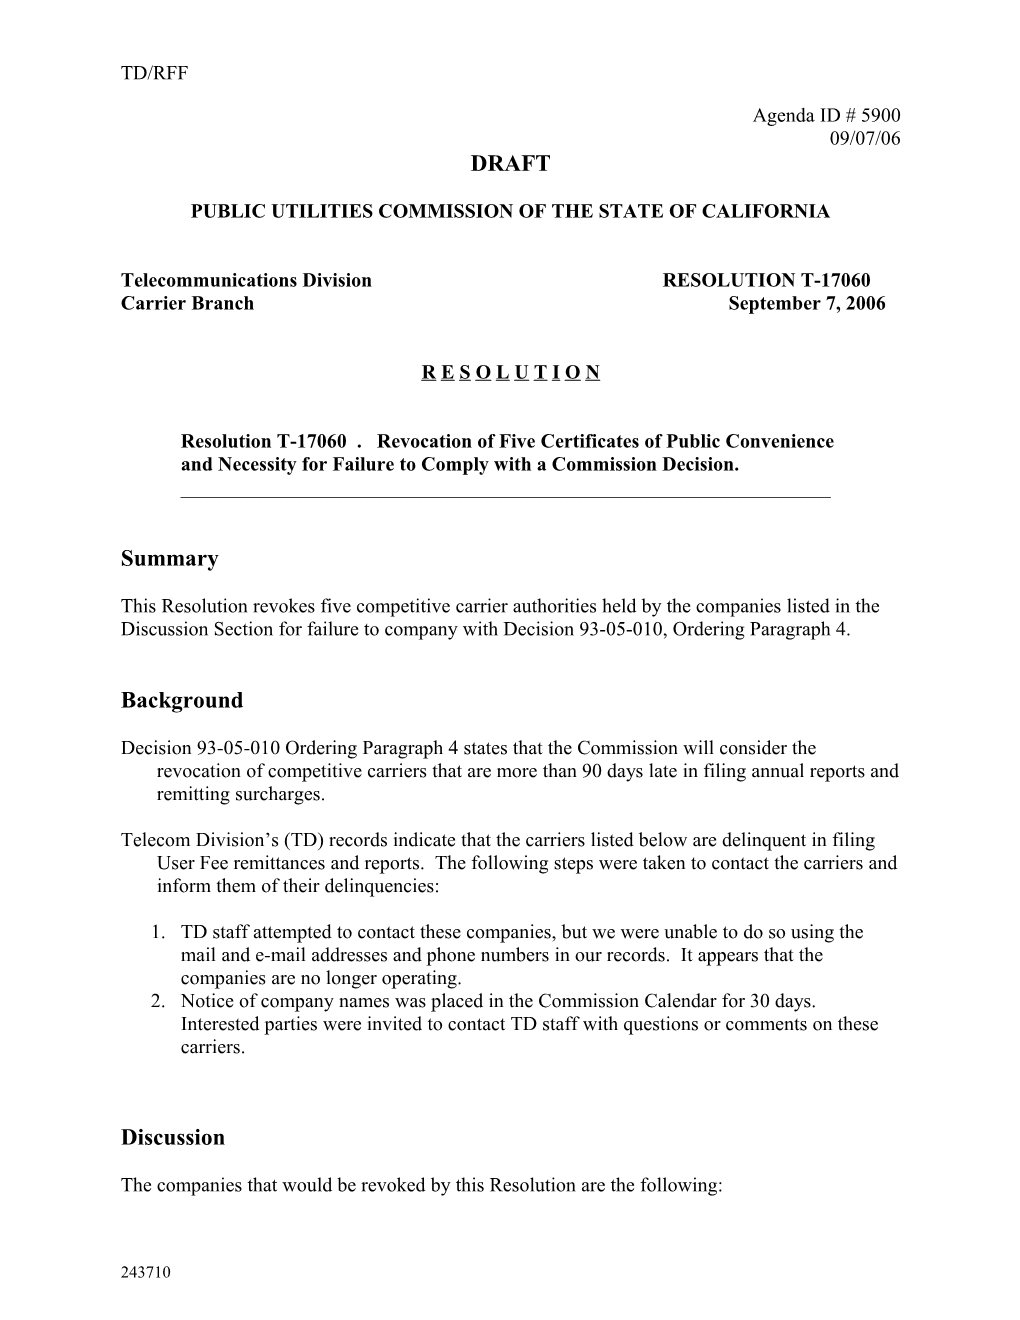 Public Utilities Commission of the State of California s66